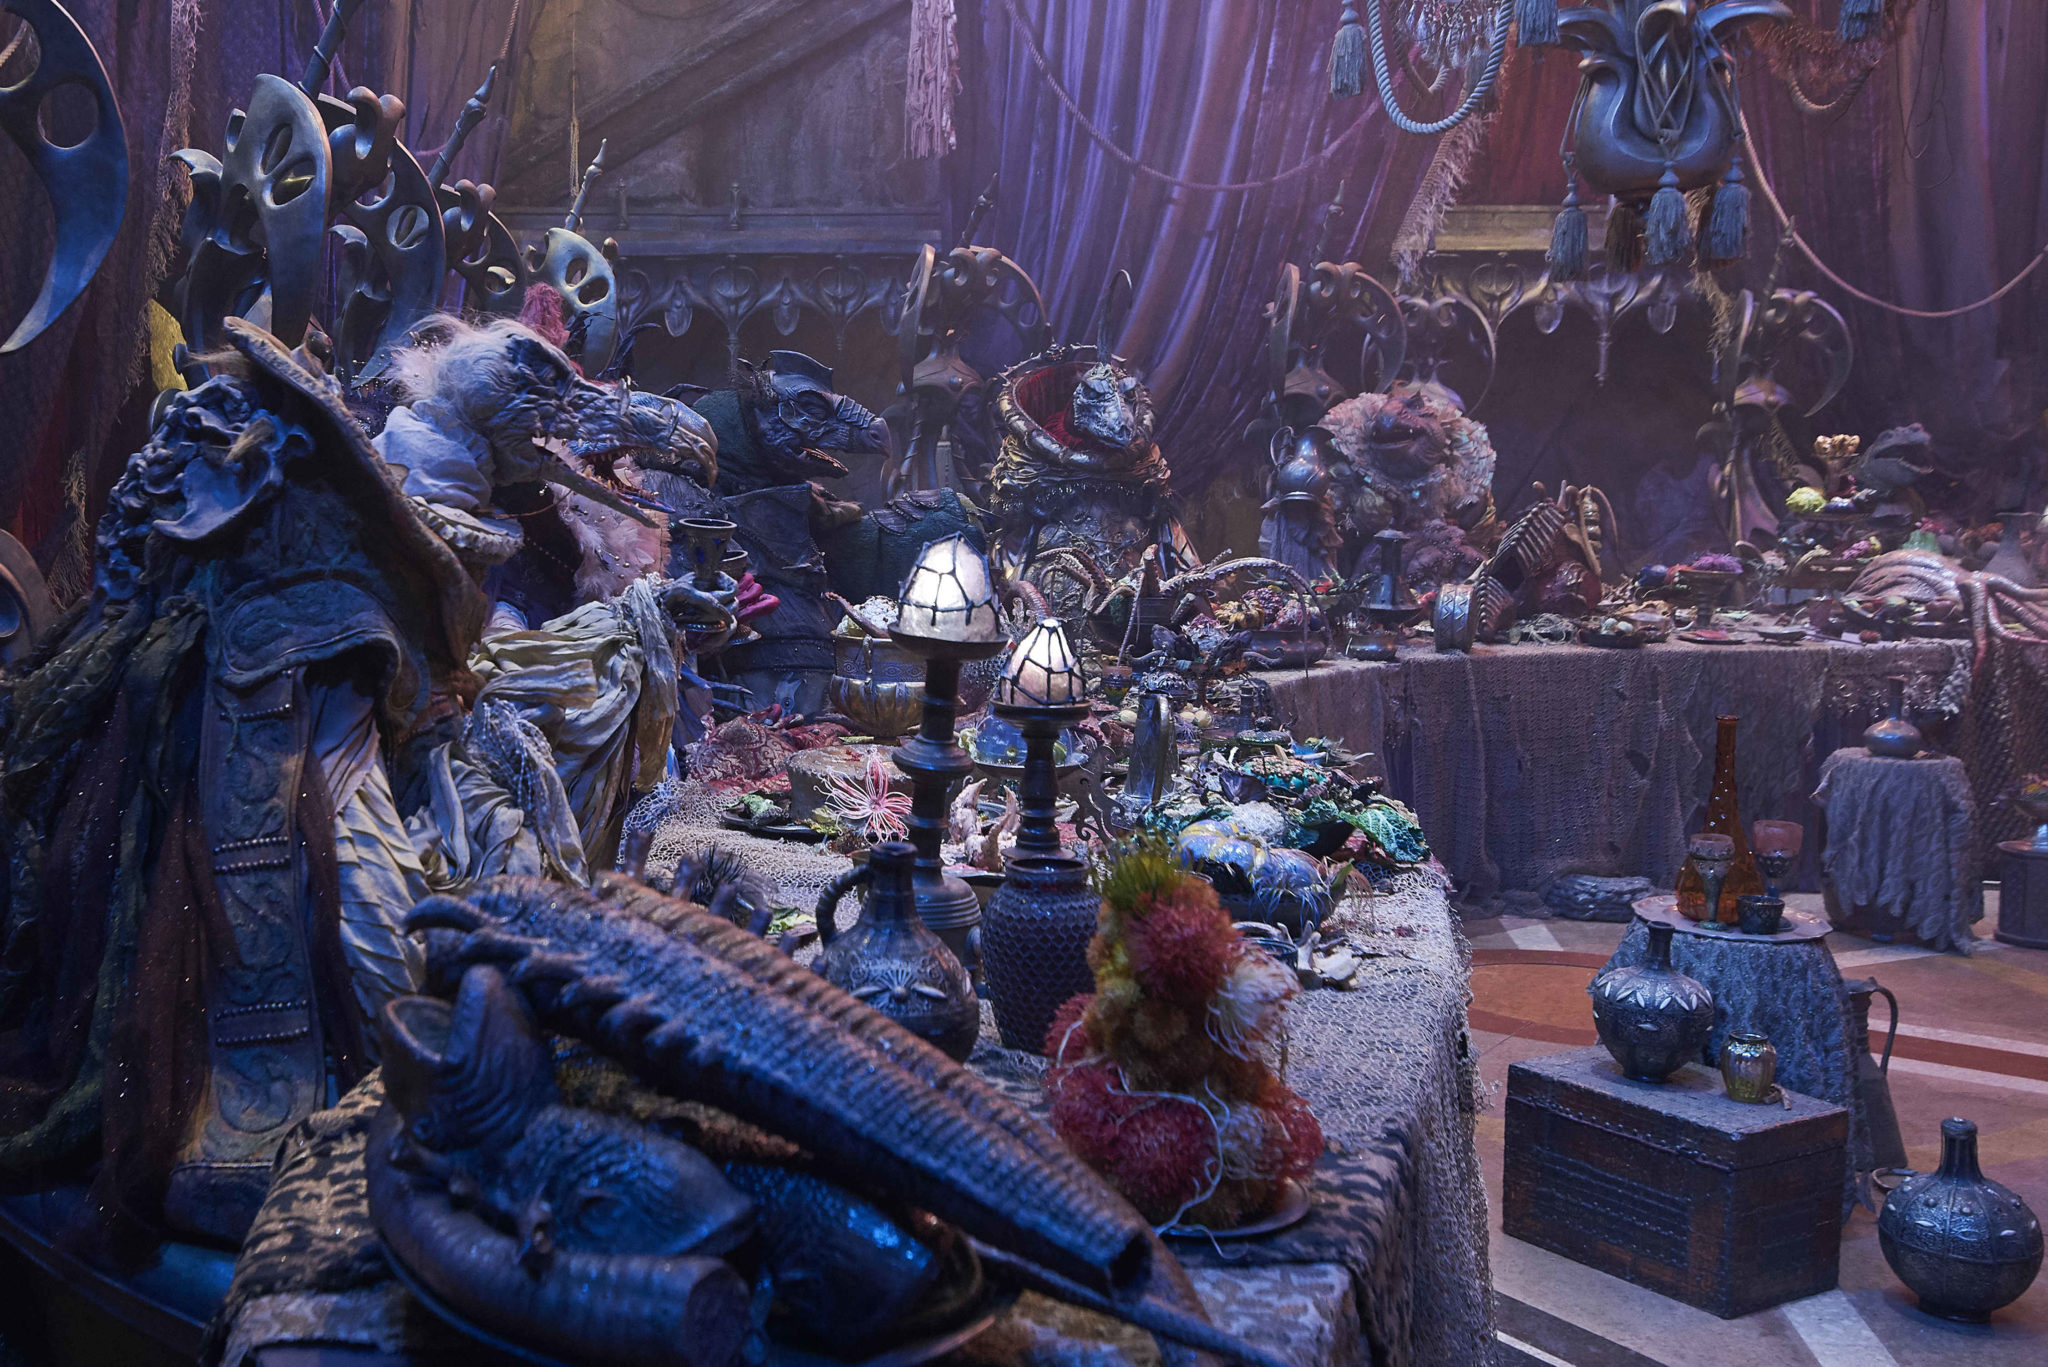 Scene from <i>The Dark Crystal: Age of Resistance</i>